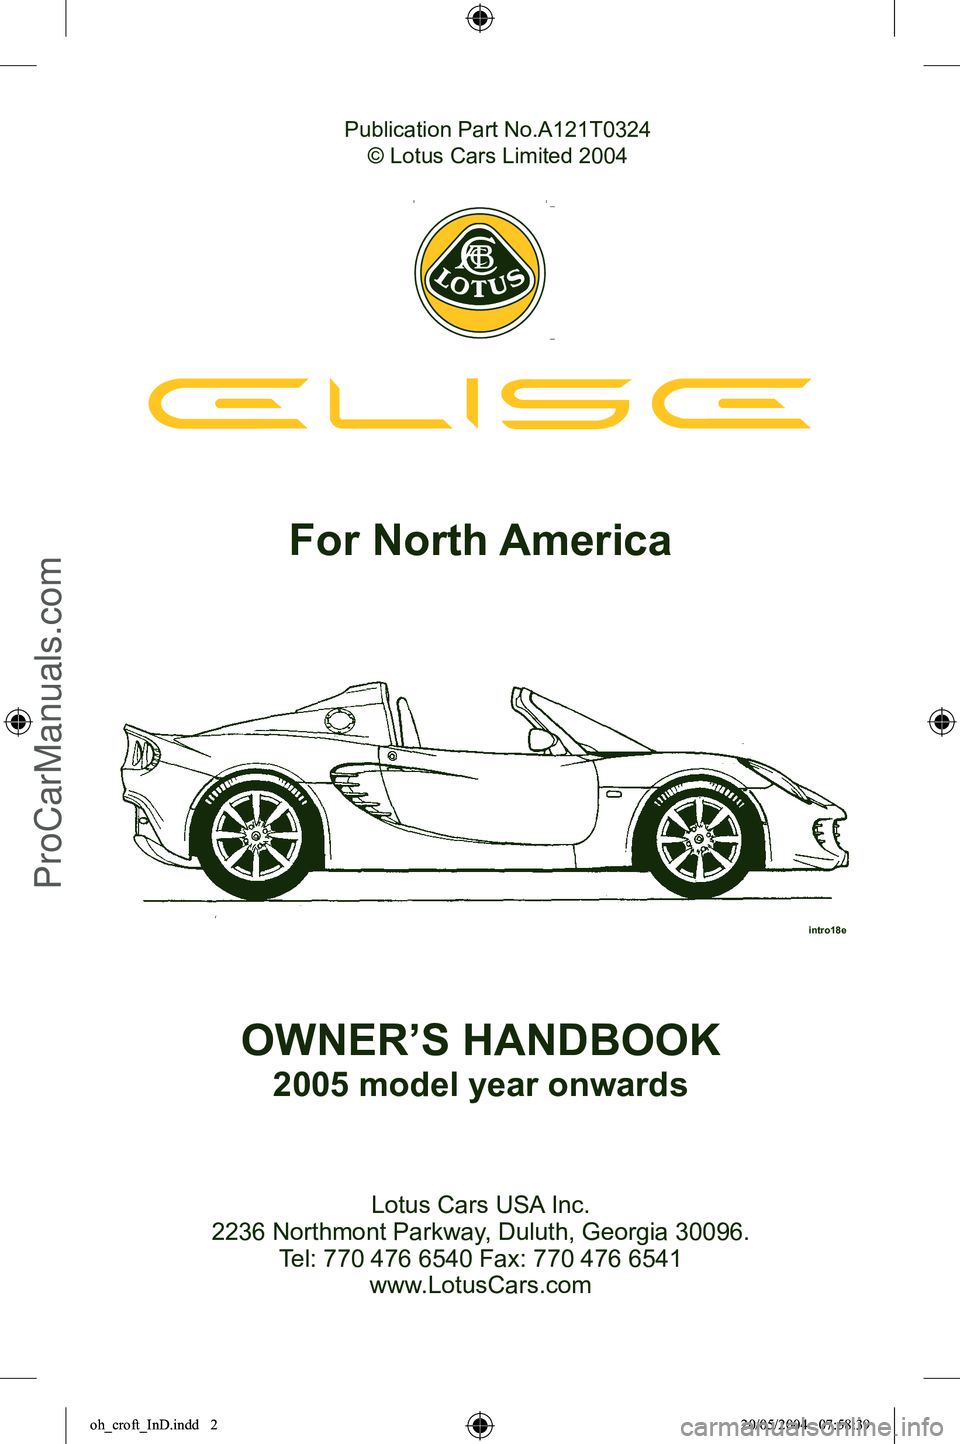 LOTUS ELISE 2005  Owners Manual 
Publication Part No.A121T0324
© Lotus Cars Limited 2004
Lotus Cars USA Inc.
2236 Northmont Parkway, Duluth, Georgia 30096.  Tel: 770 476 6540 Fax: 770 476 6541 www.LotusCars.com
For North America
OW